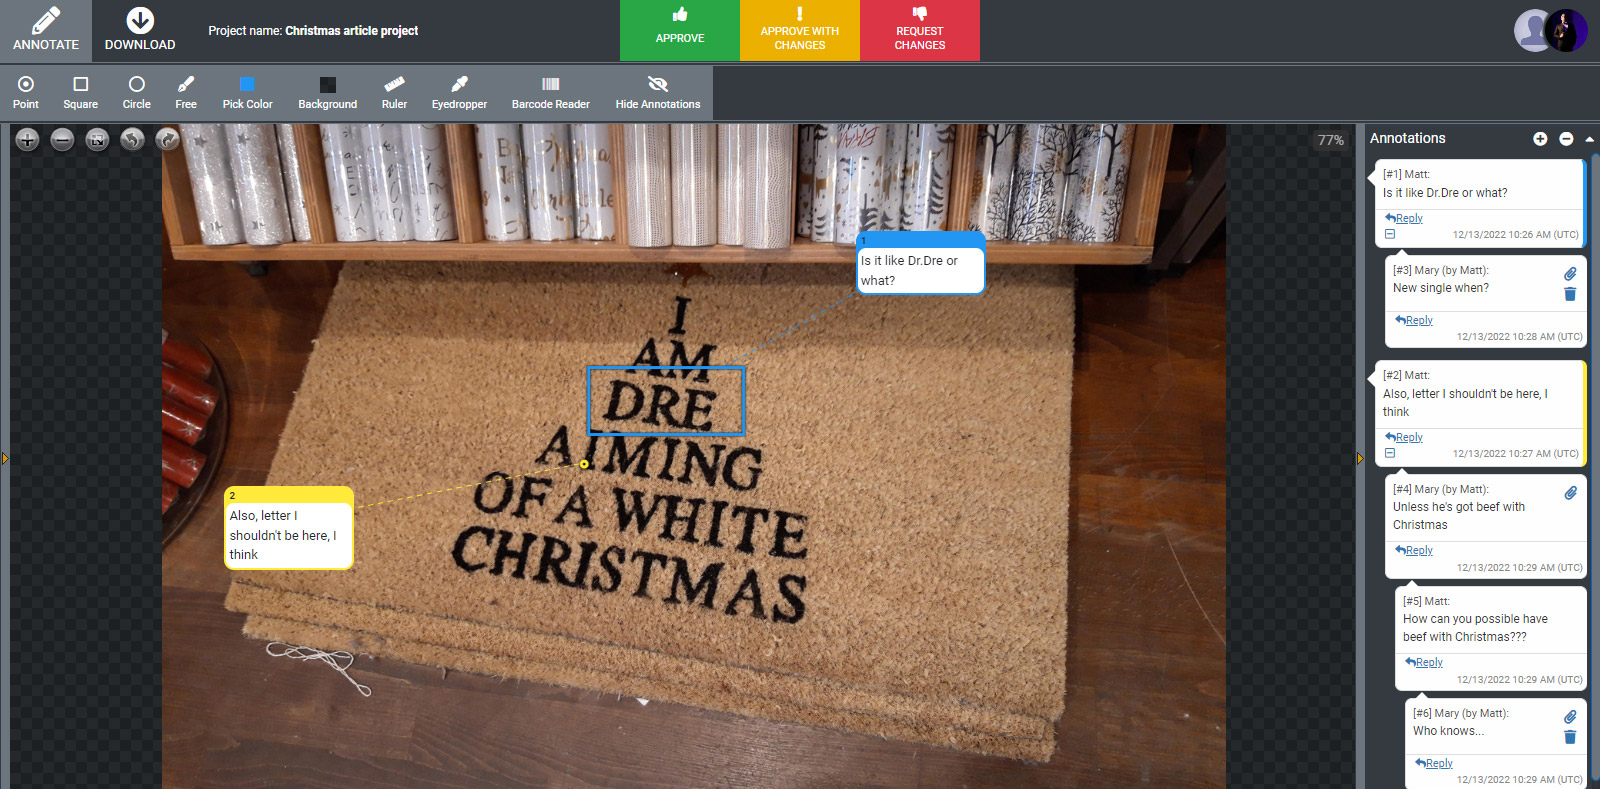 Approval Studio review tool with the doormat with a spelling mistake saying "Dre aiming" instead of "dreaming"